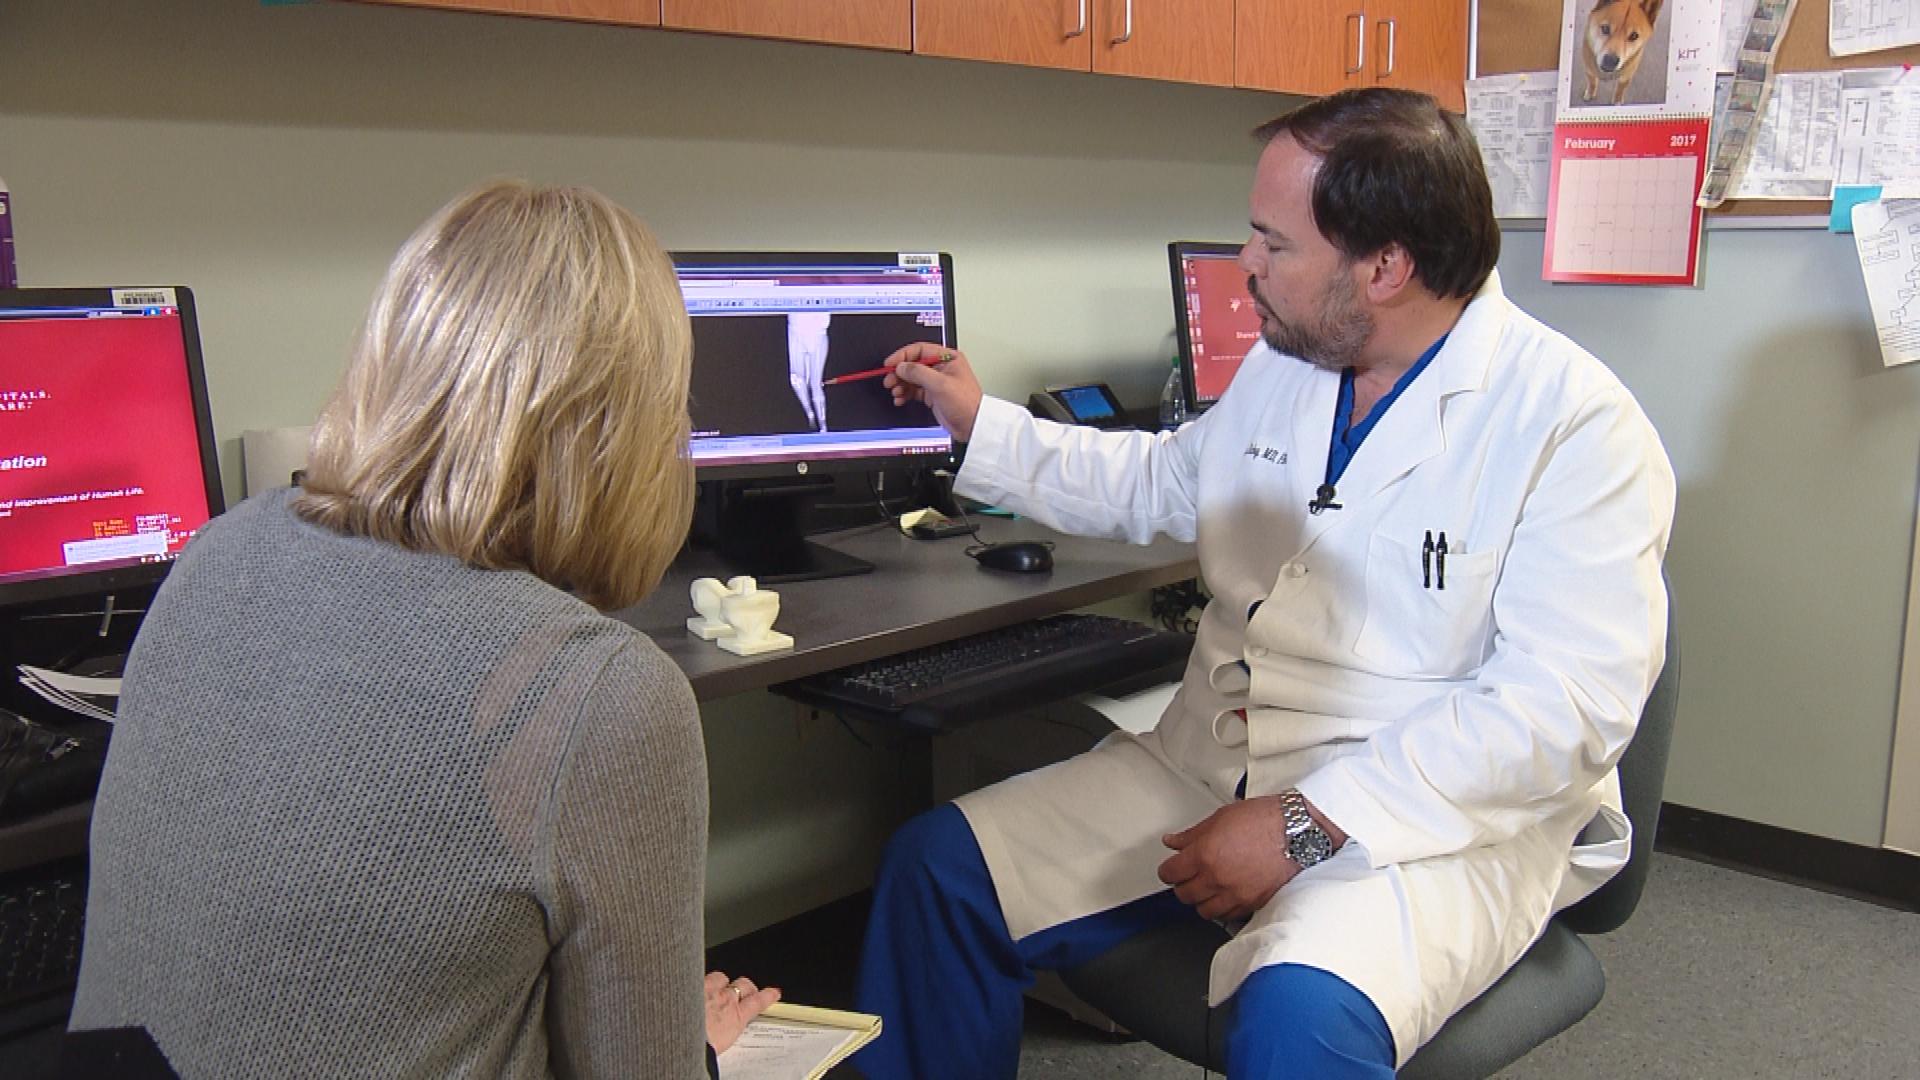 3D Knee Replacement ‘We Make The Knee Fit You’ CBS Denver